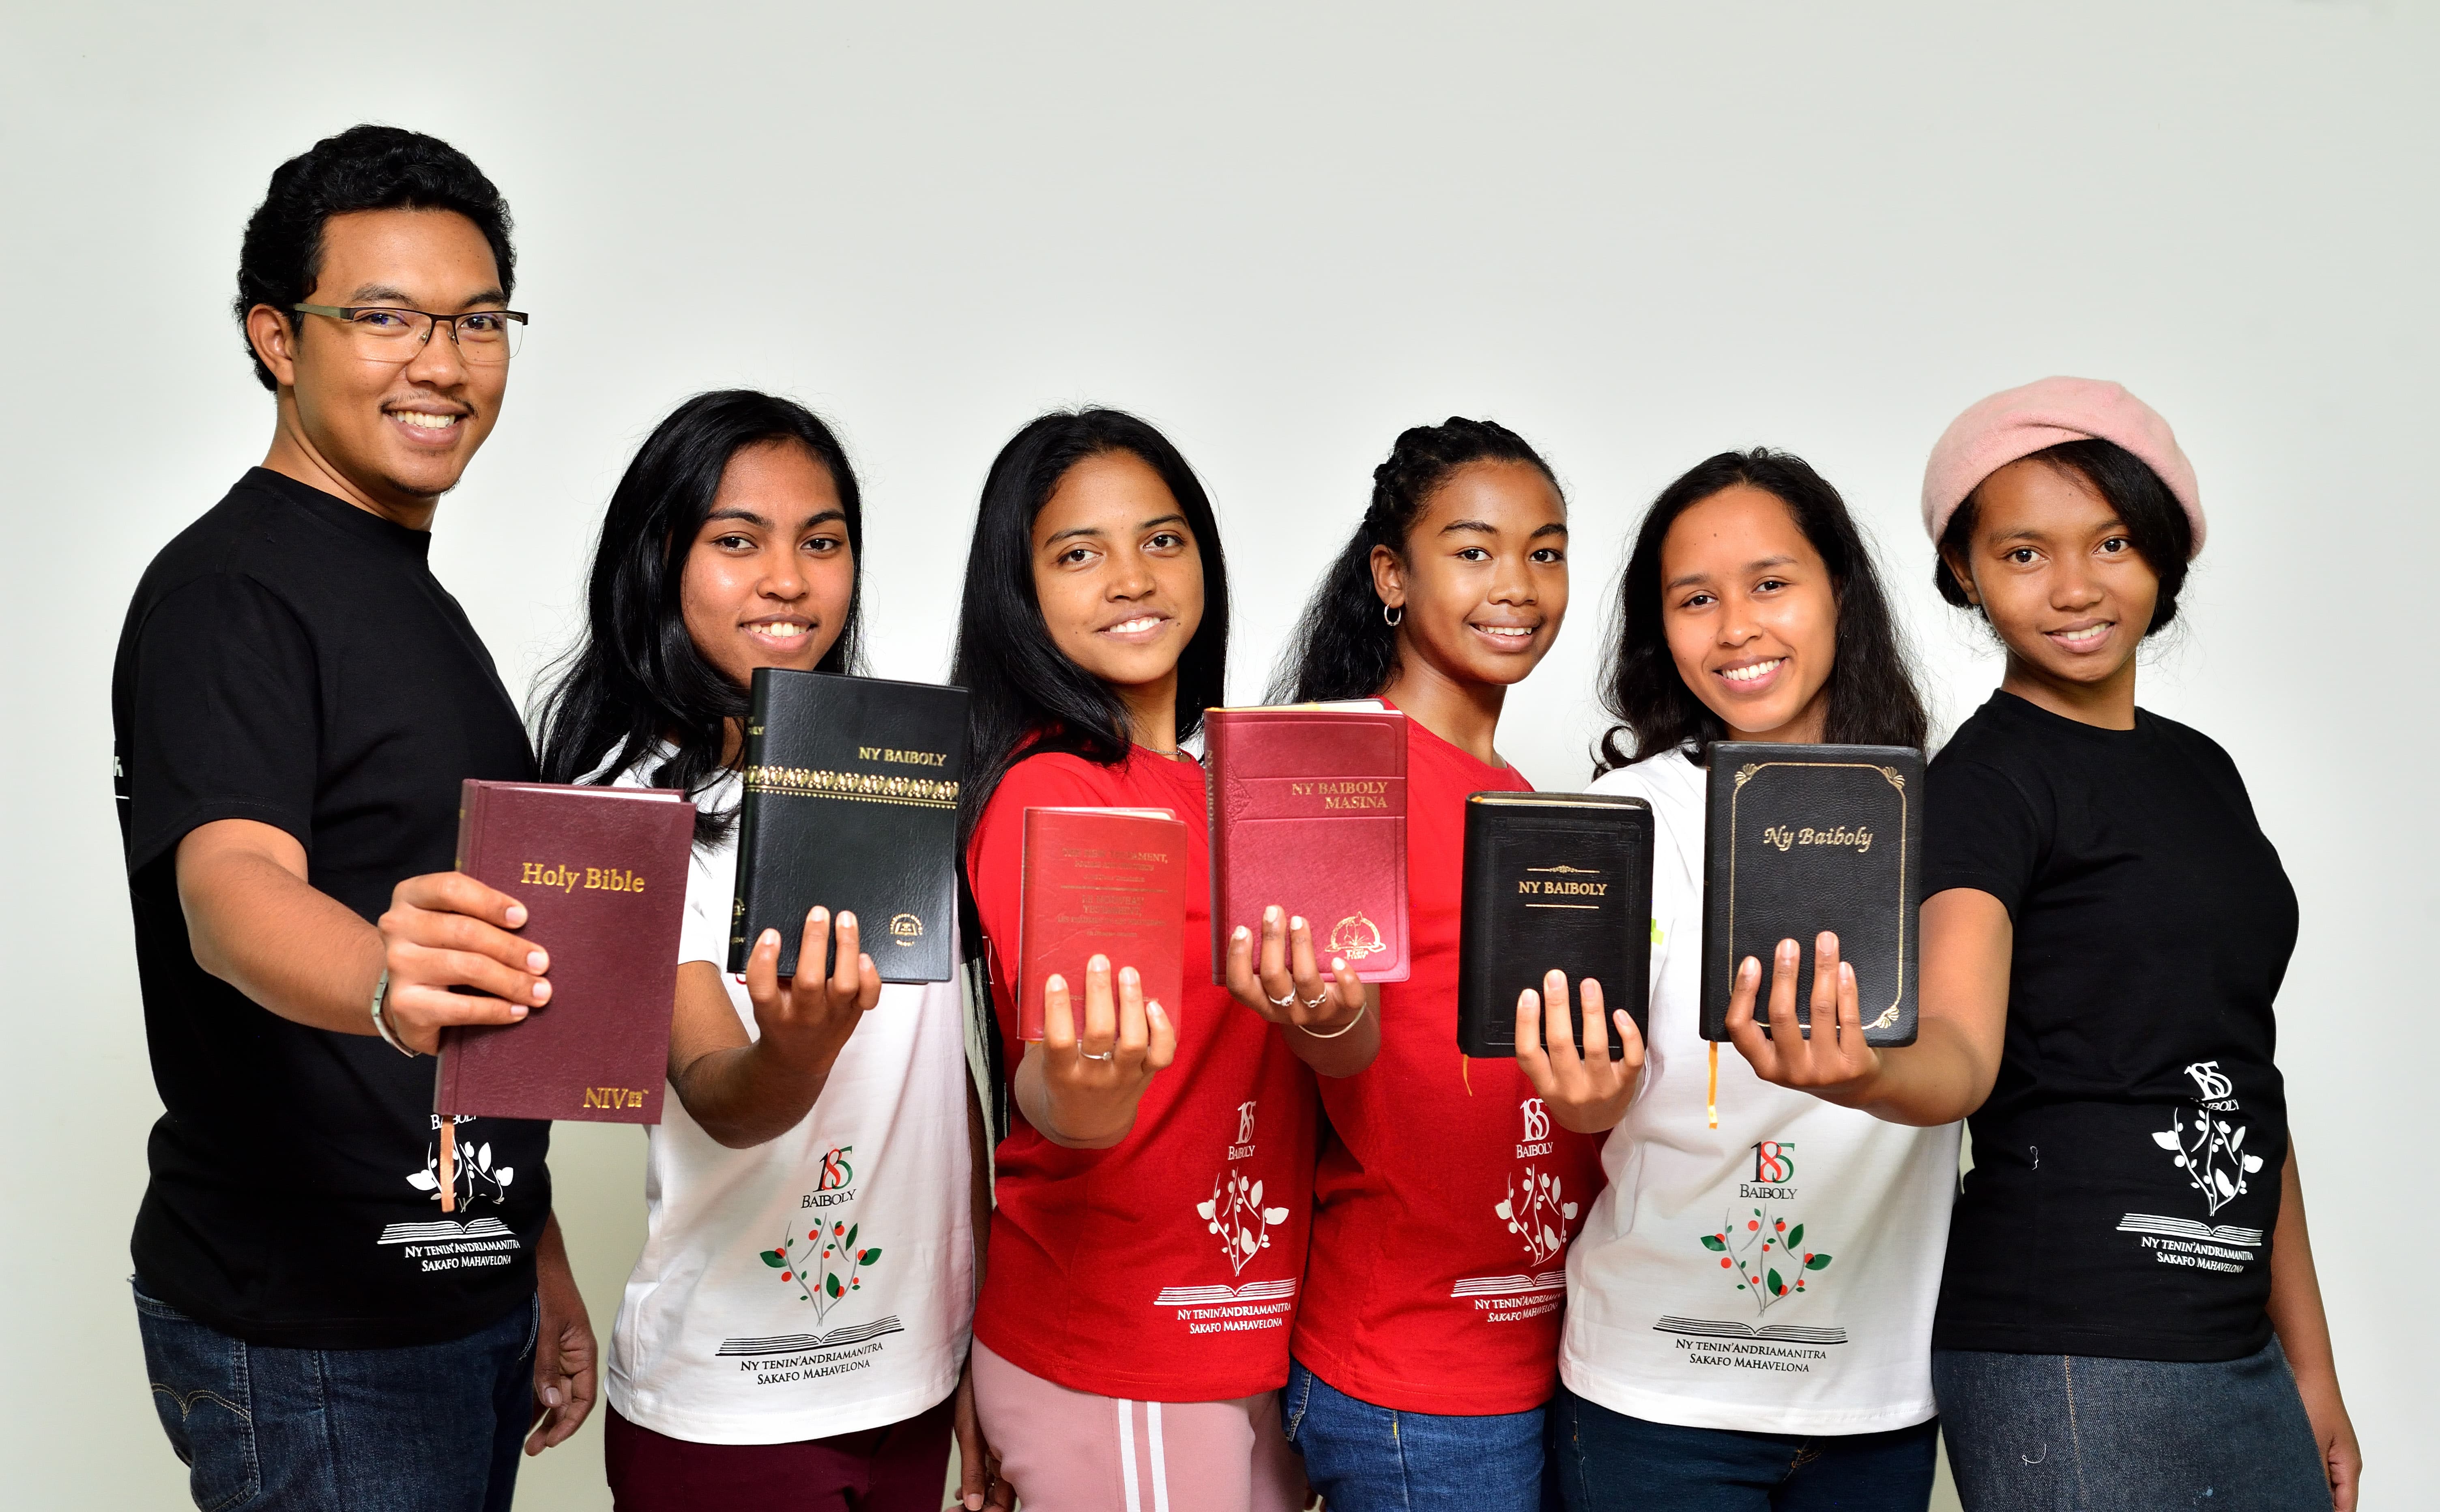 185 free Bibles for the 185th anniversary of the Malagasy Bible!